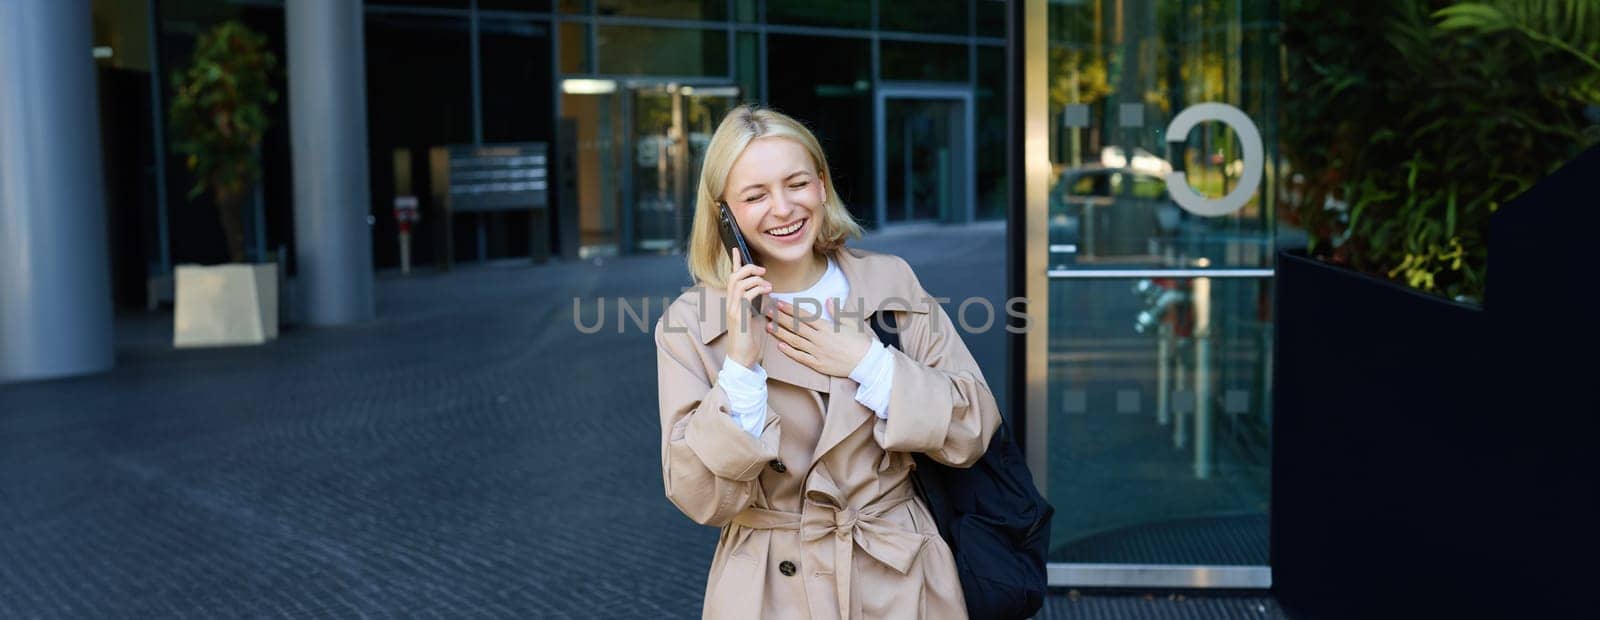 Carefree blond female model, talking to friend on mobile phone, waiting for someone near building on street, chatting on smartphone and laughing.